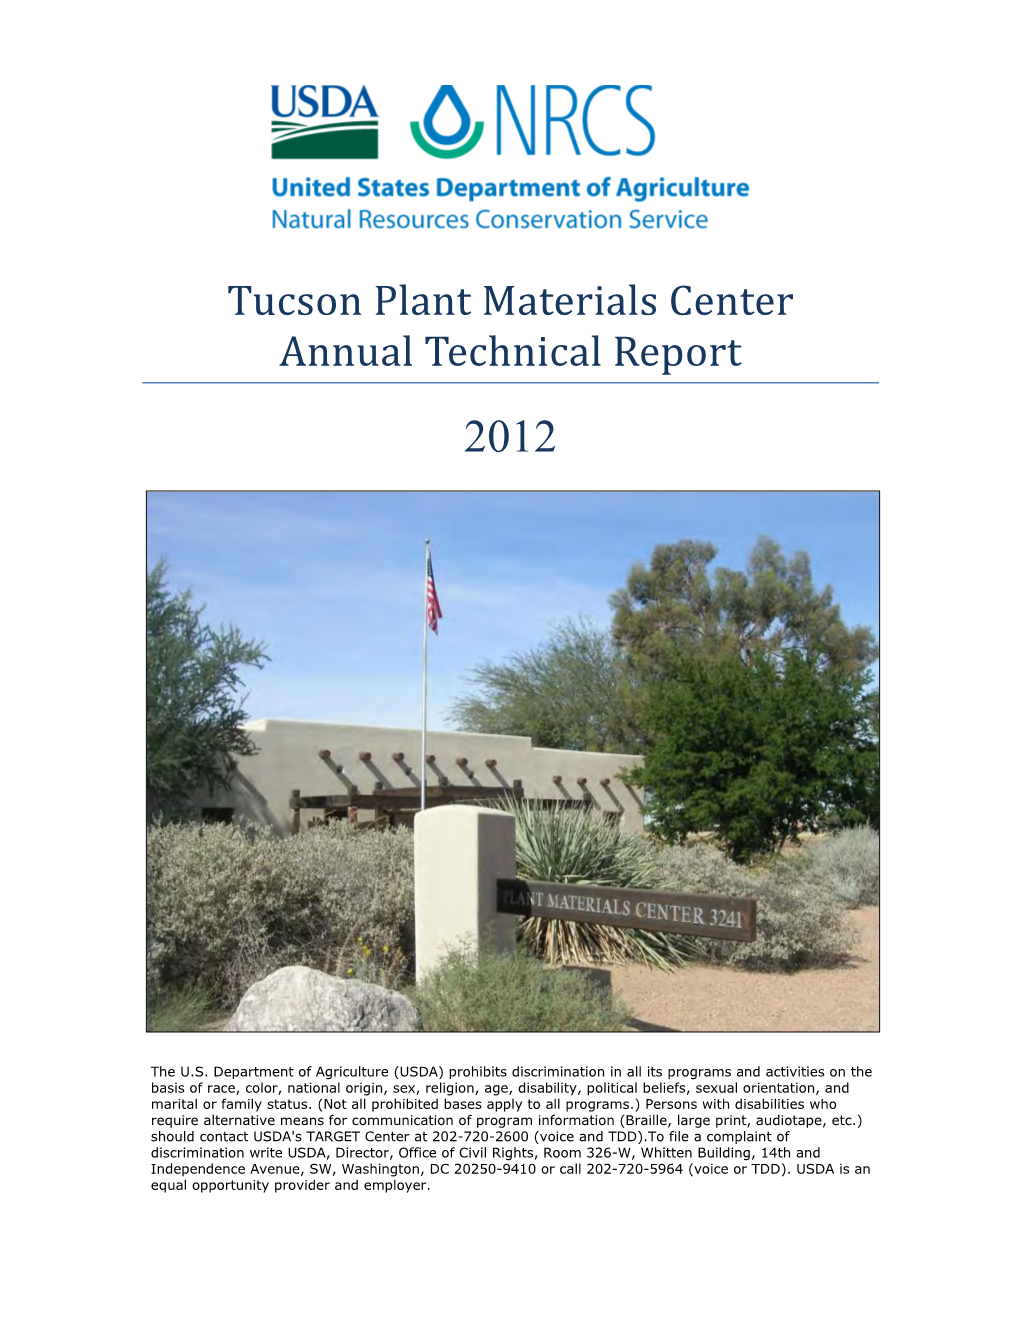 Annual Technical Report 2012